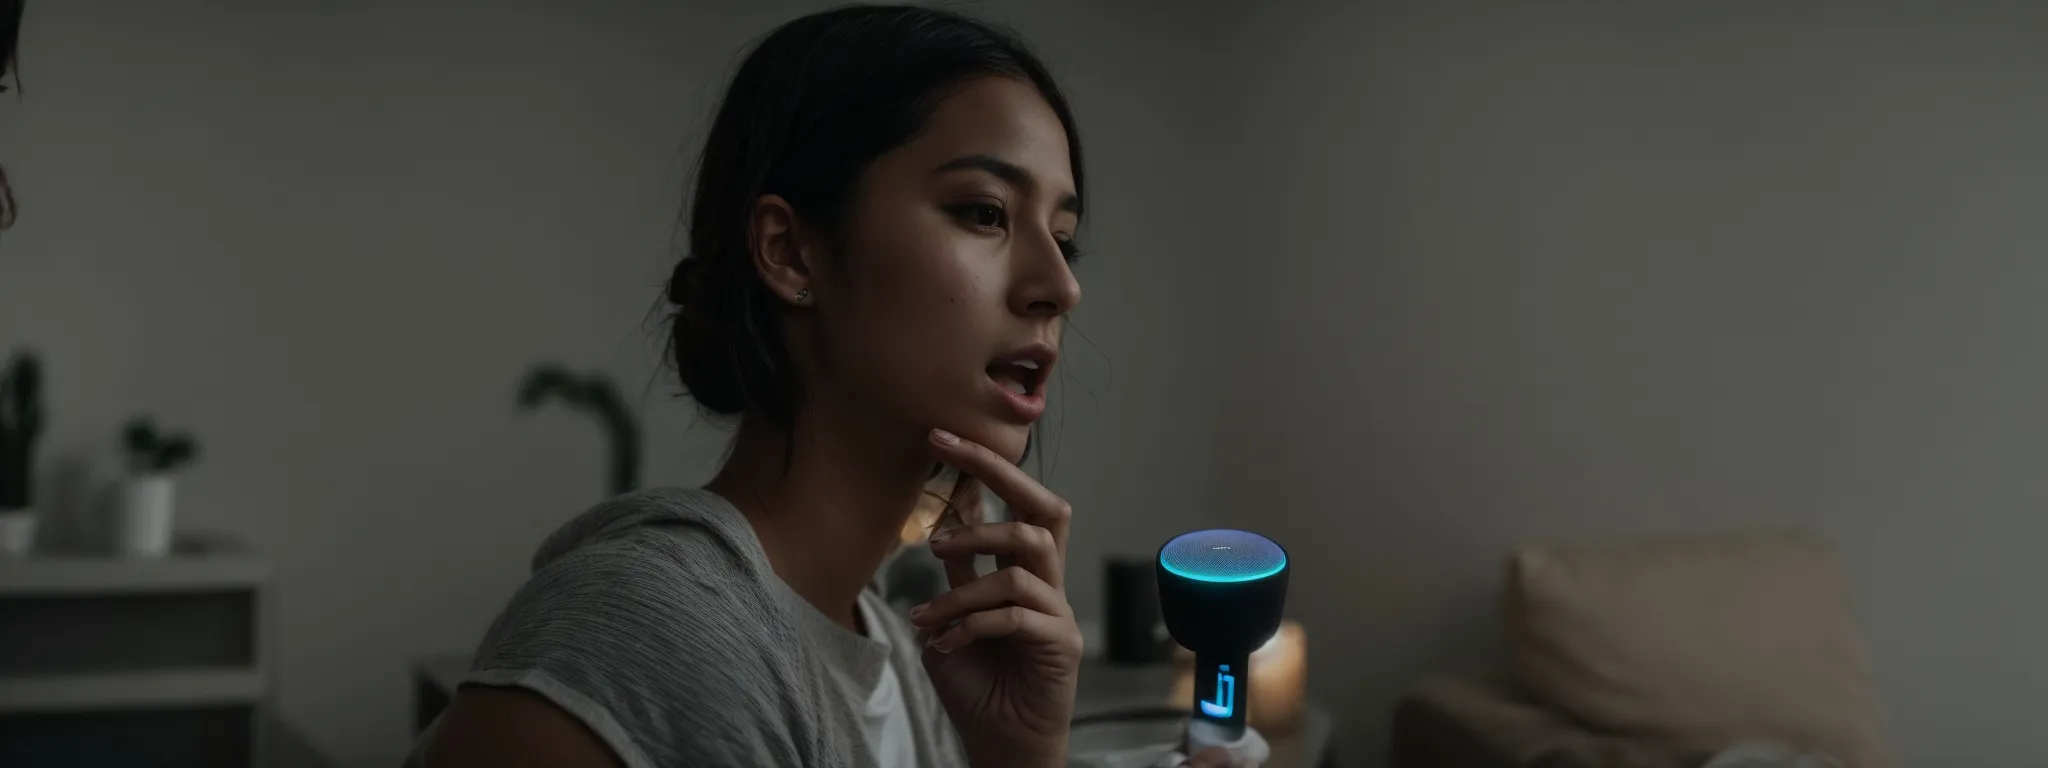 a person talks to a smart speaker, initiating a voice search, with visible sound waves emanating from their mouth towards the device.